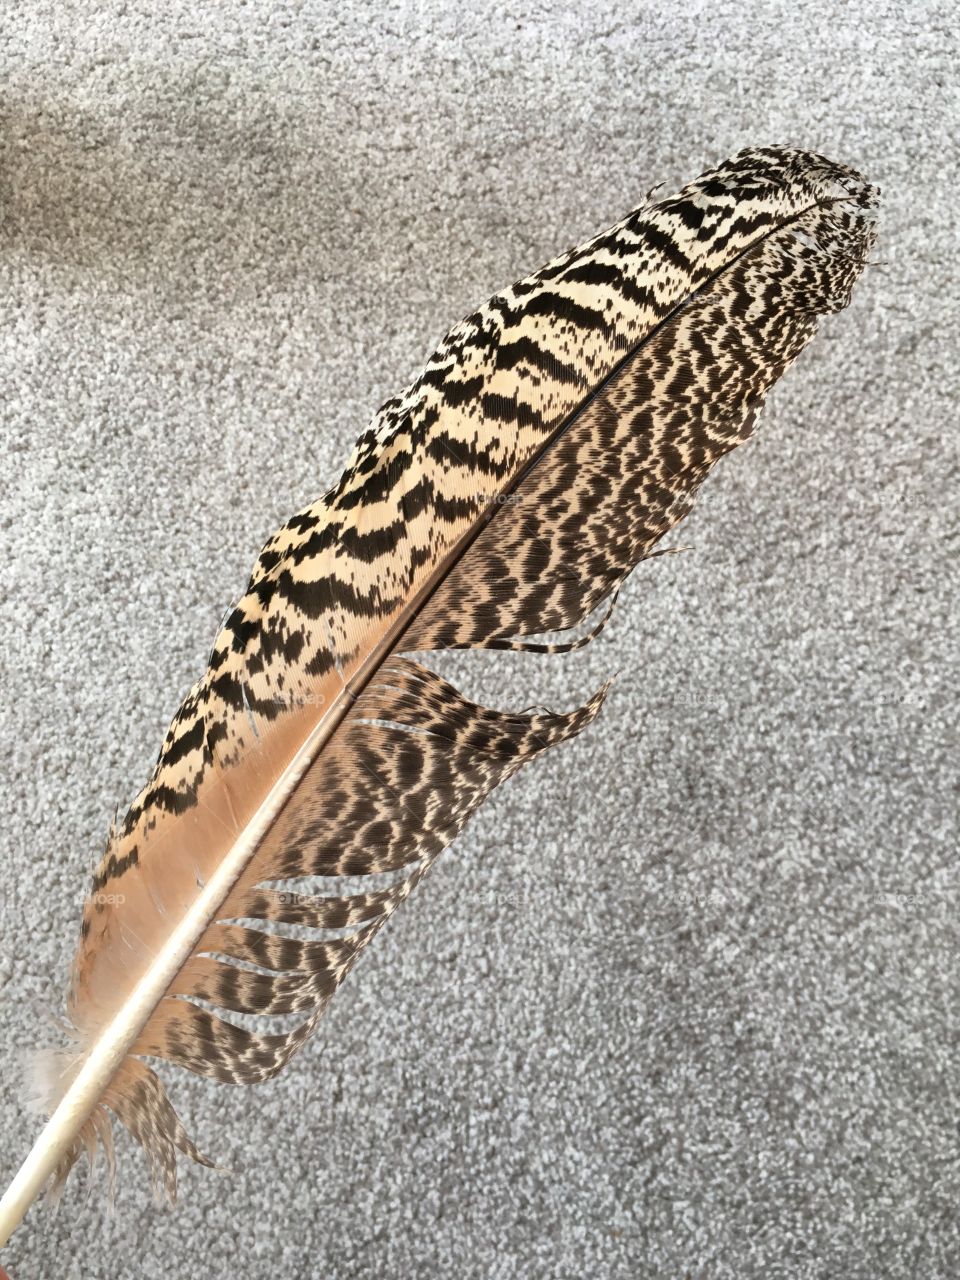 Beautiful large mottled bird feather from an English pheasant on grey carpet